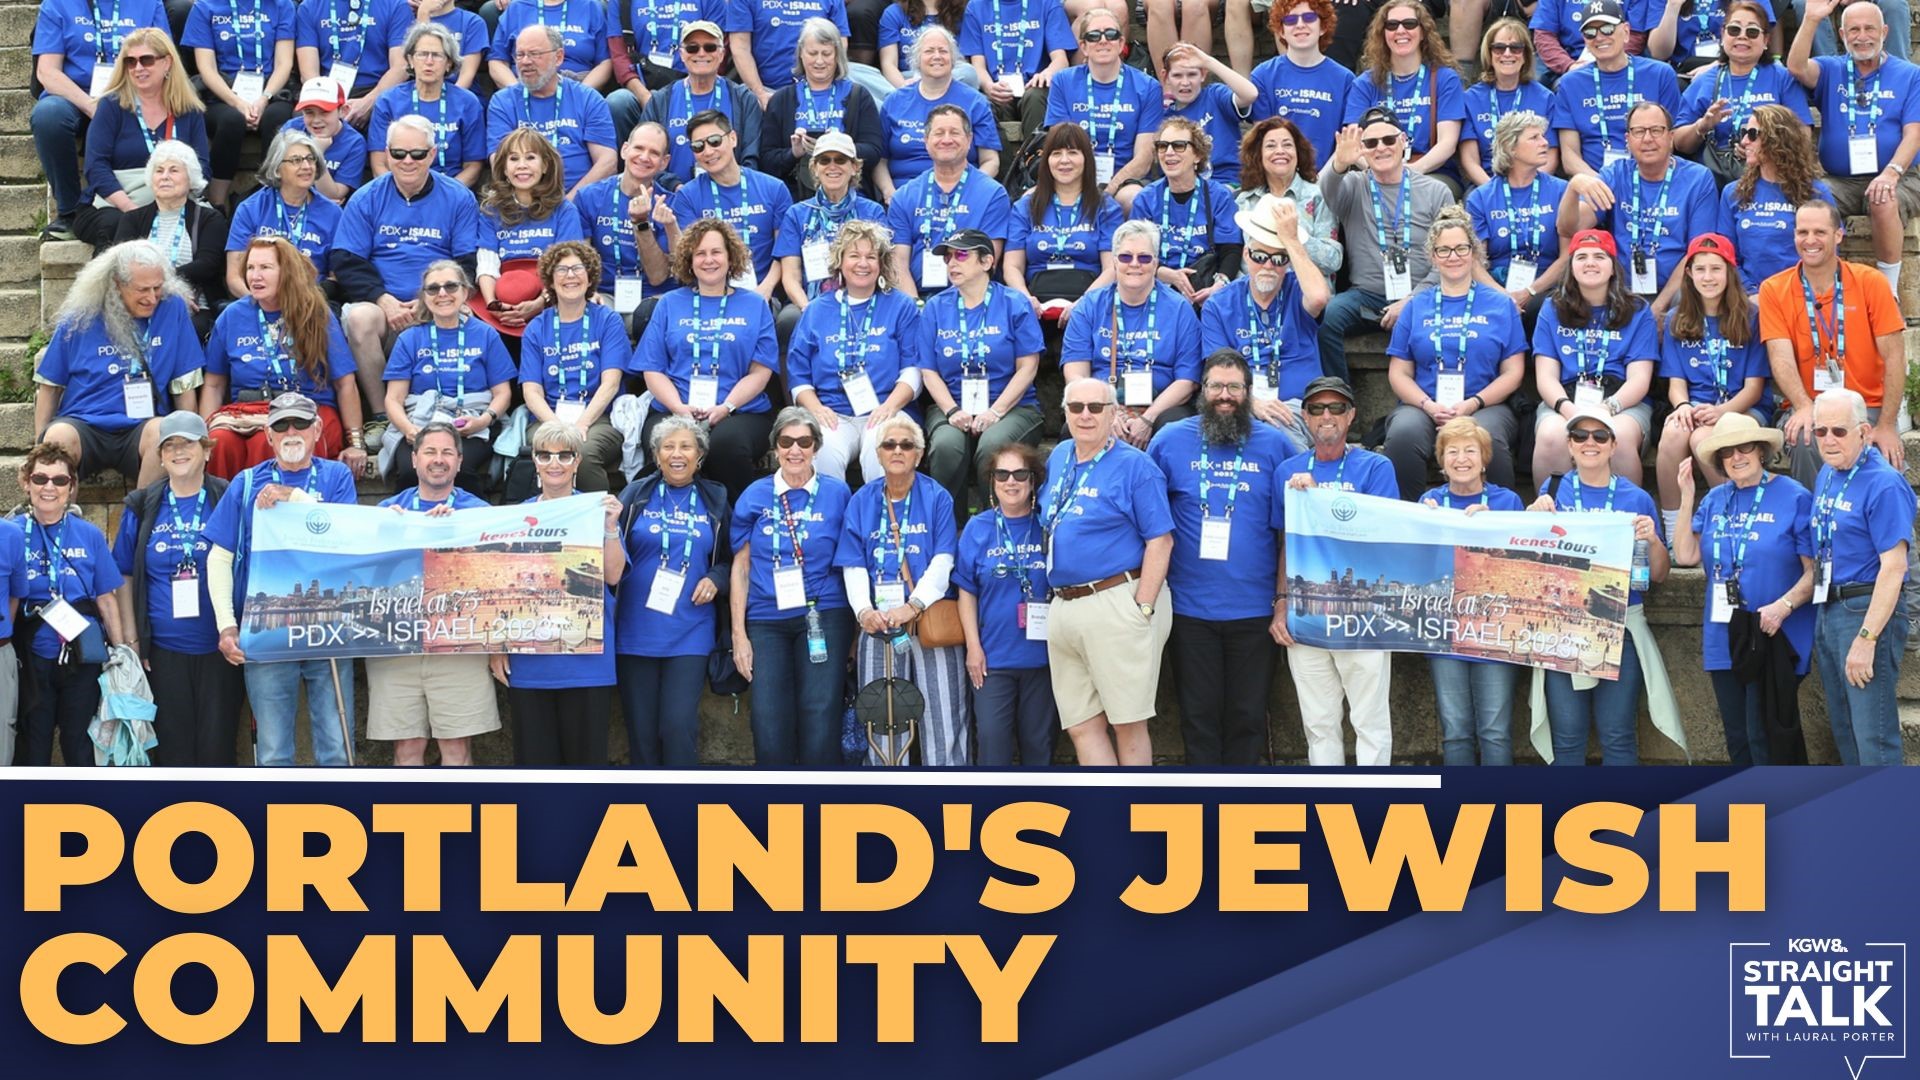 The Jewish Federation of Greater Portland conducted a survey of Jewish people living in the Portland area to get a better idea of the community's needs and wants